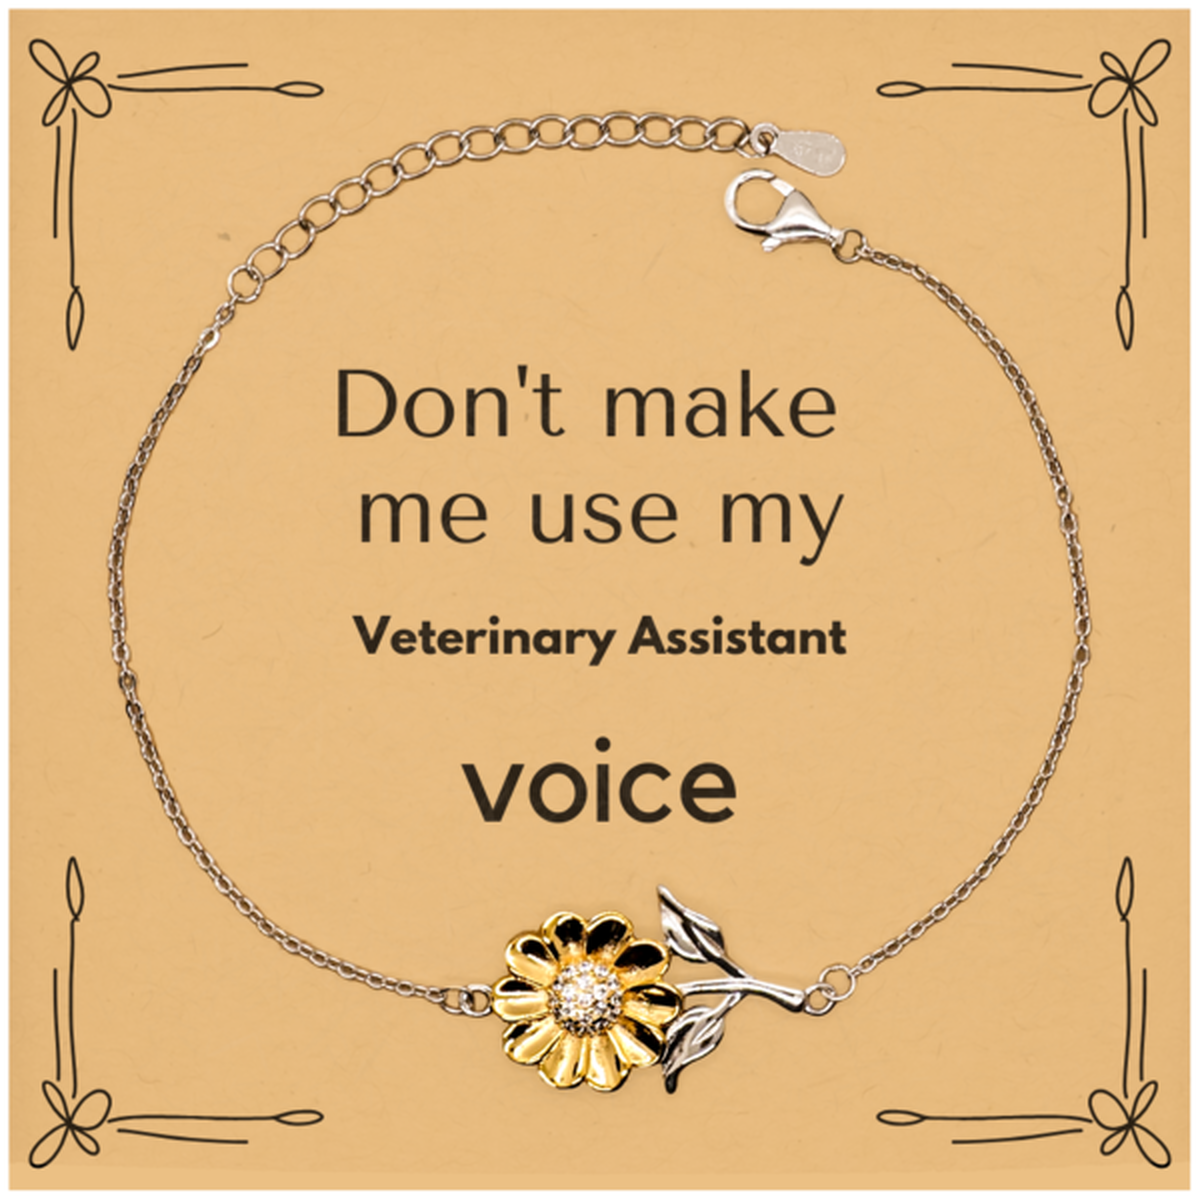 Don't make me use my Veterinary Assistant voice, Sarcasm Veterinary Assistant Card Gifts, Christmas Veterinary Assistant Sunflower Bracelet Birthday Unique Gifts For Veterinary Assistant Coworkers, Men, Women, Colleague, Friends